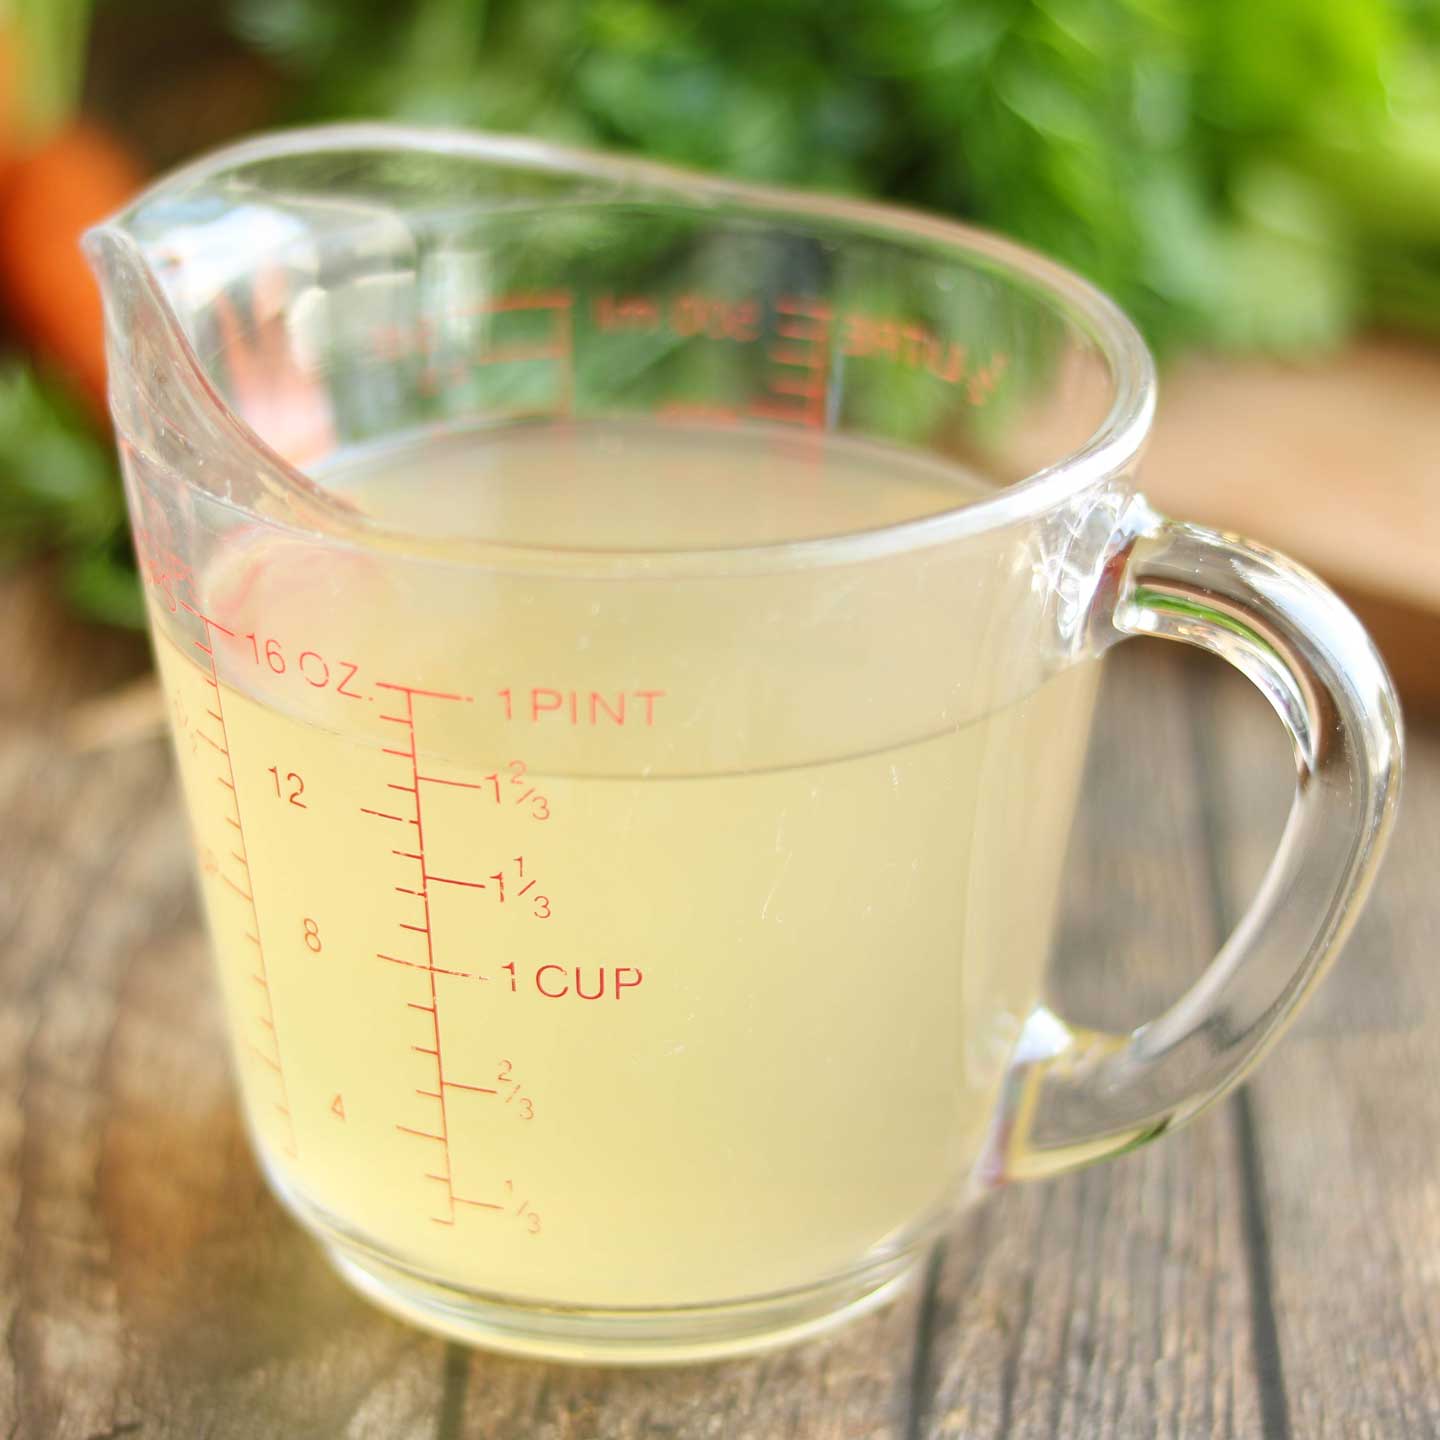 Reduced sodium chicken broth is a great base for most recipes.